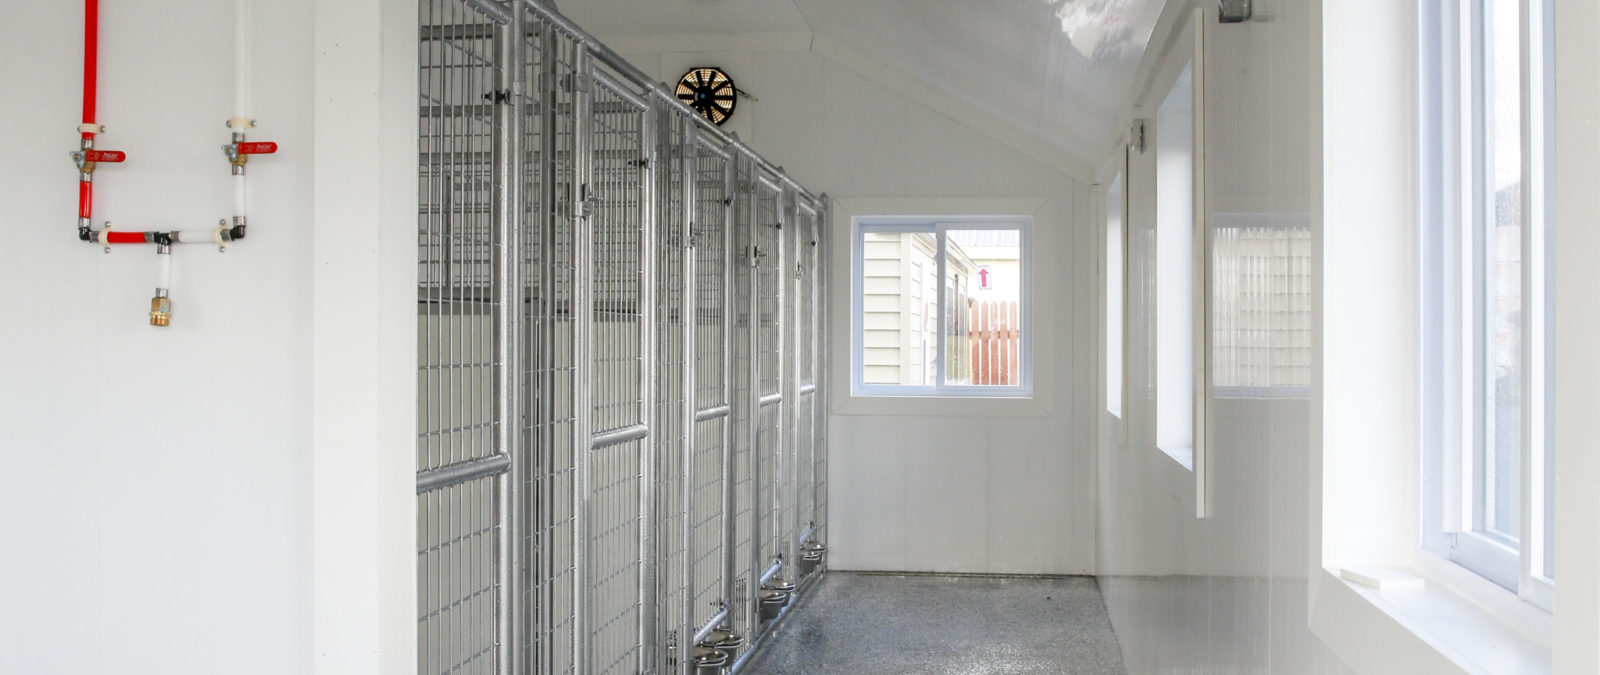 dog kennels for groomers interior view of 10x28 5 run kennel showing welded wire panels and exhaust fan 